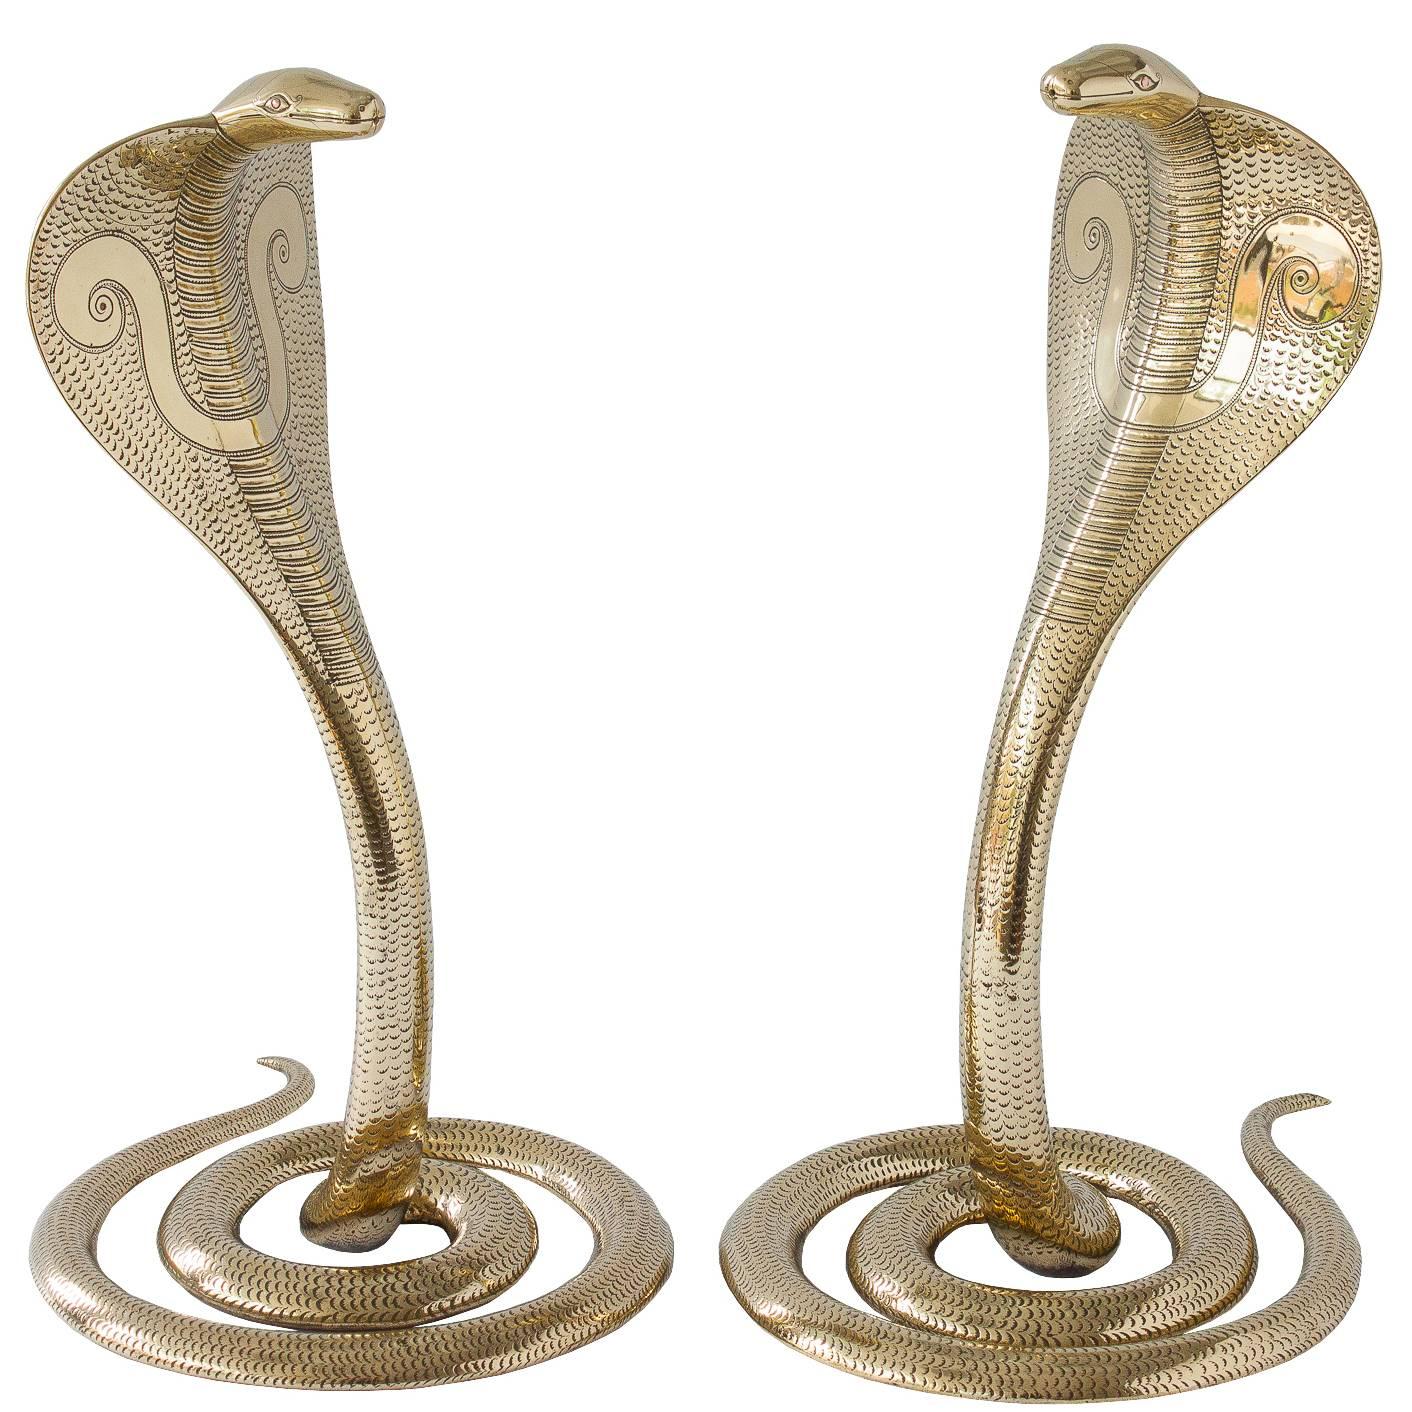 Pair of Solid Brass Cobra Sculptures or Andirons